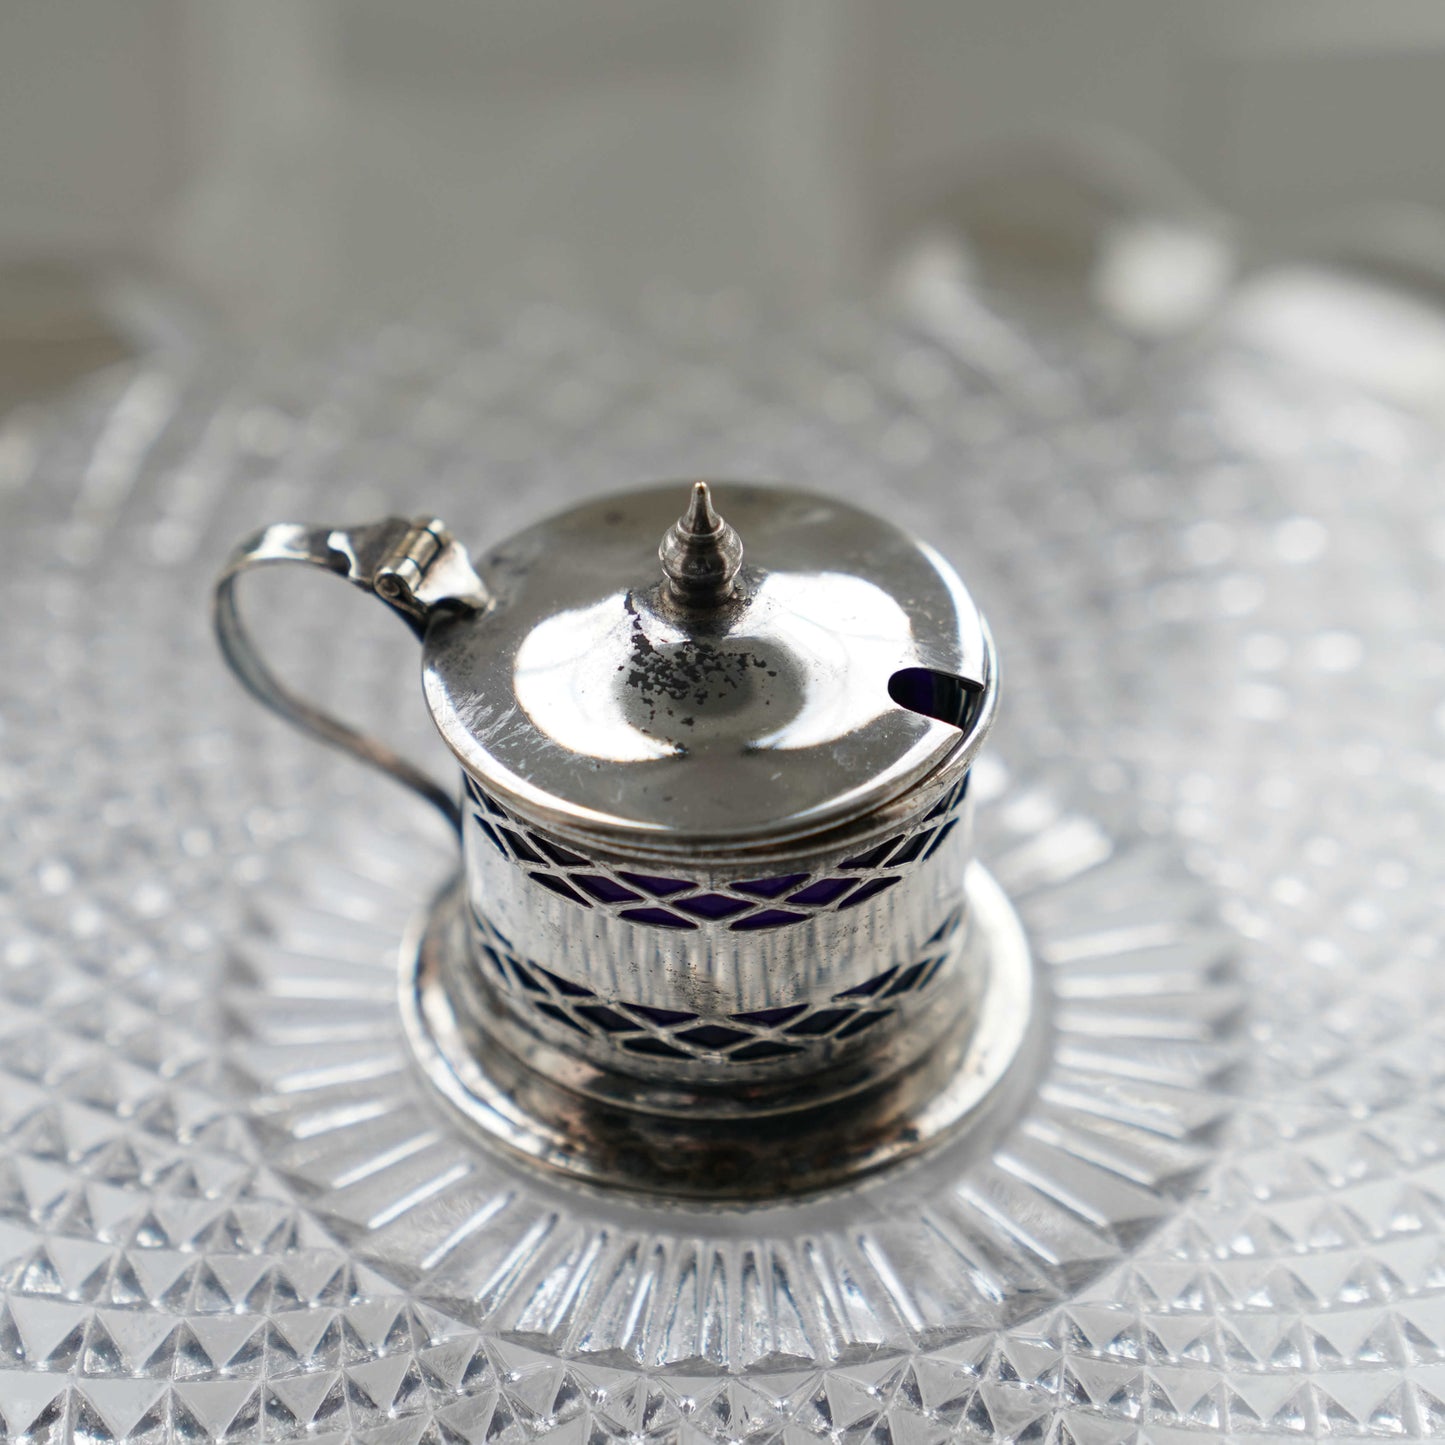 English antique silver-plated mustard pot